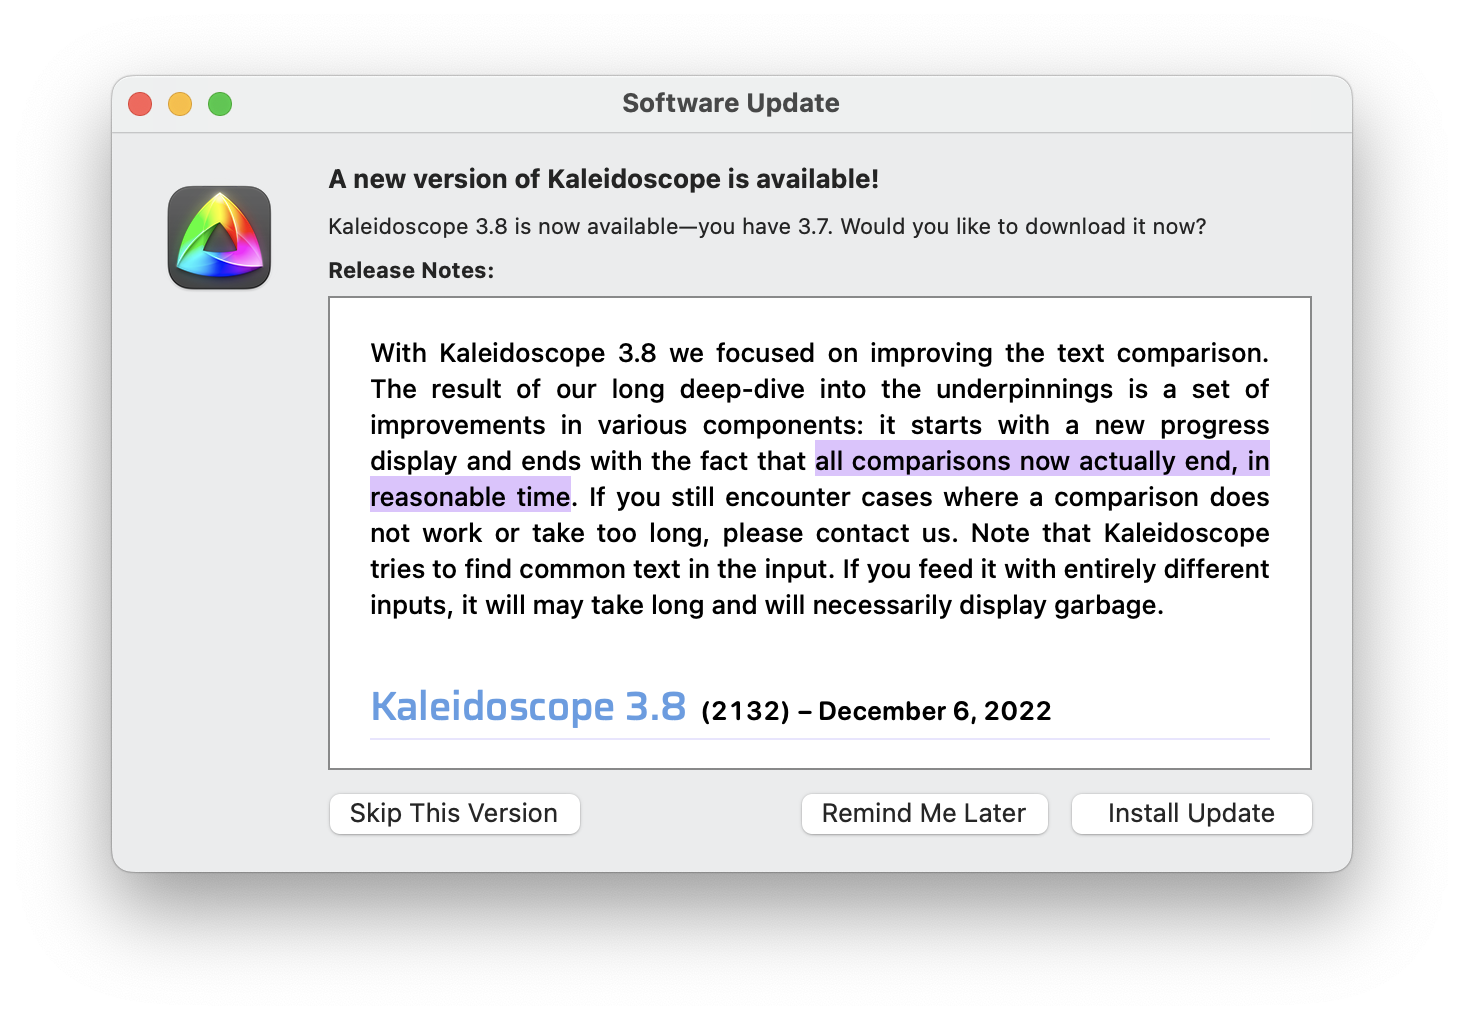 Screenshot of Kaleidoscope update window with the text: "all comparisons now actually end, in&10;reasonable time."